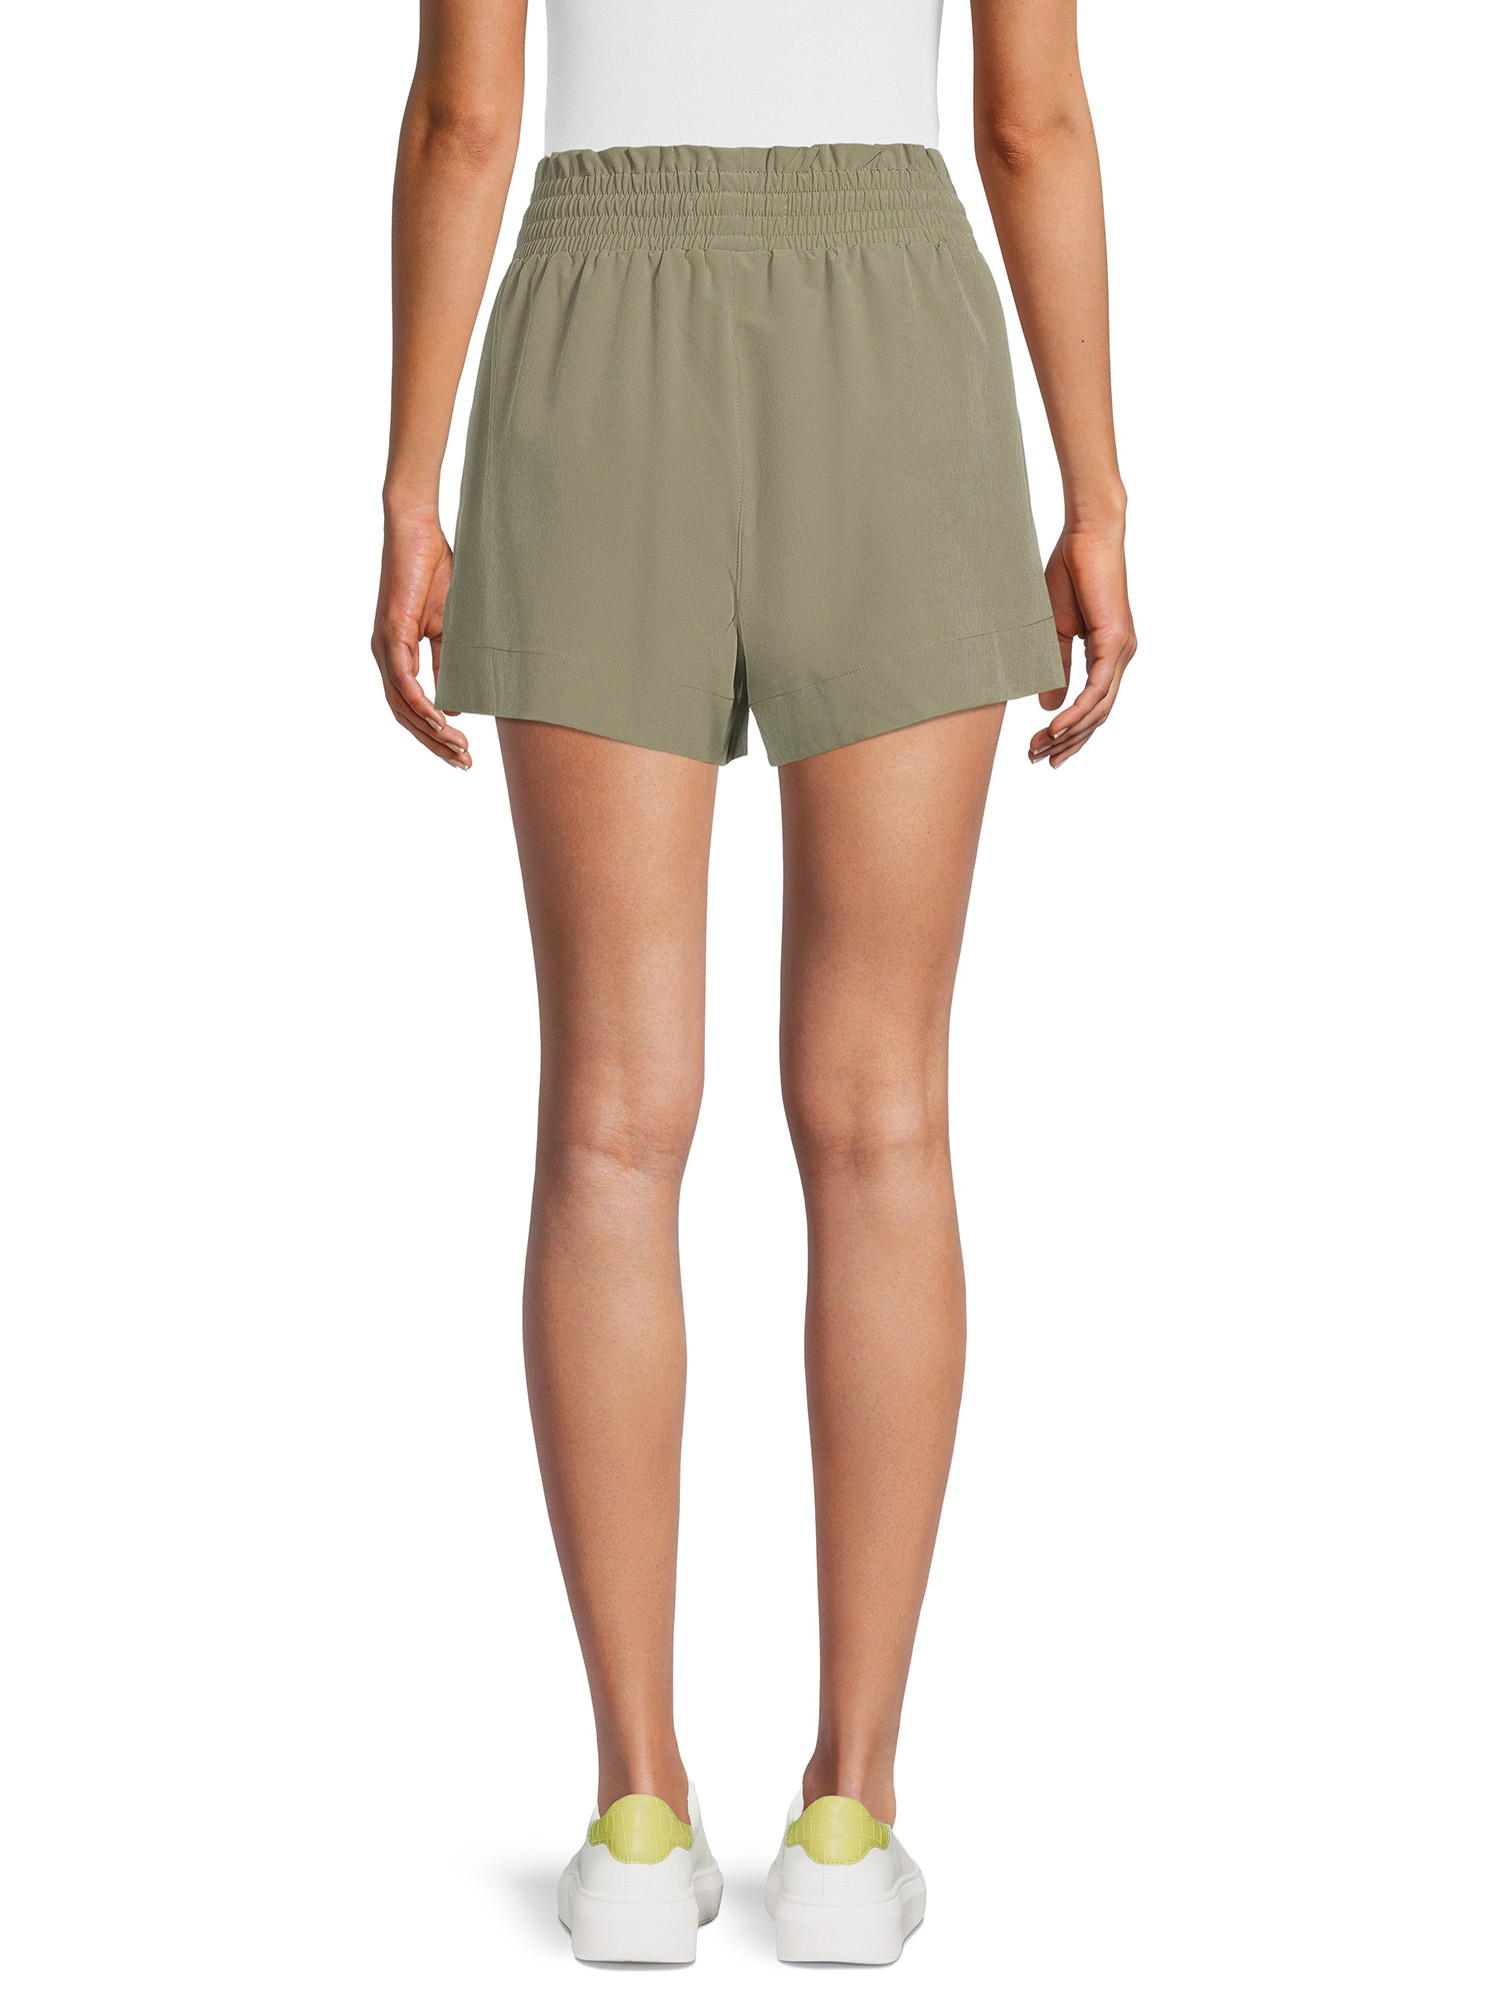 No Boundaries Juniors Seamed Stretch Shorts, Sizes XS-3XL - image 3 of 5